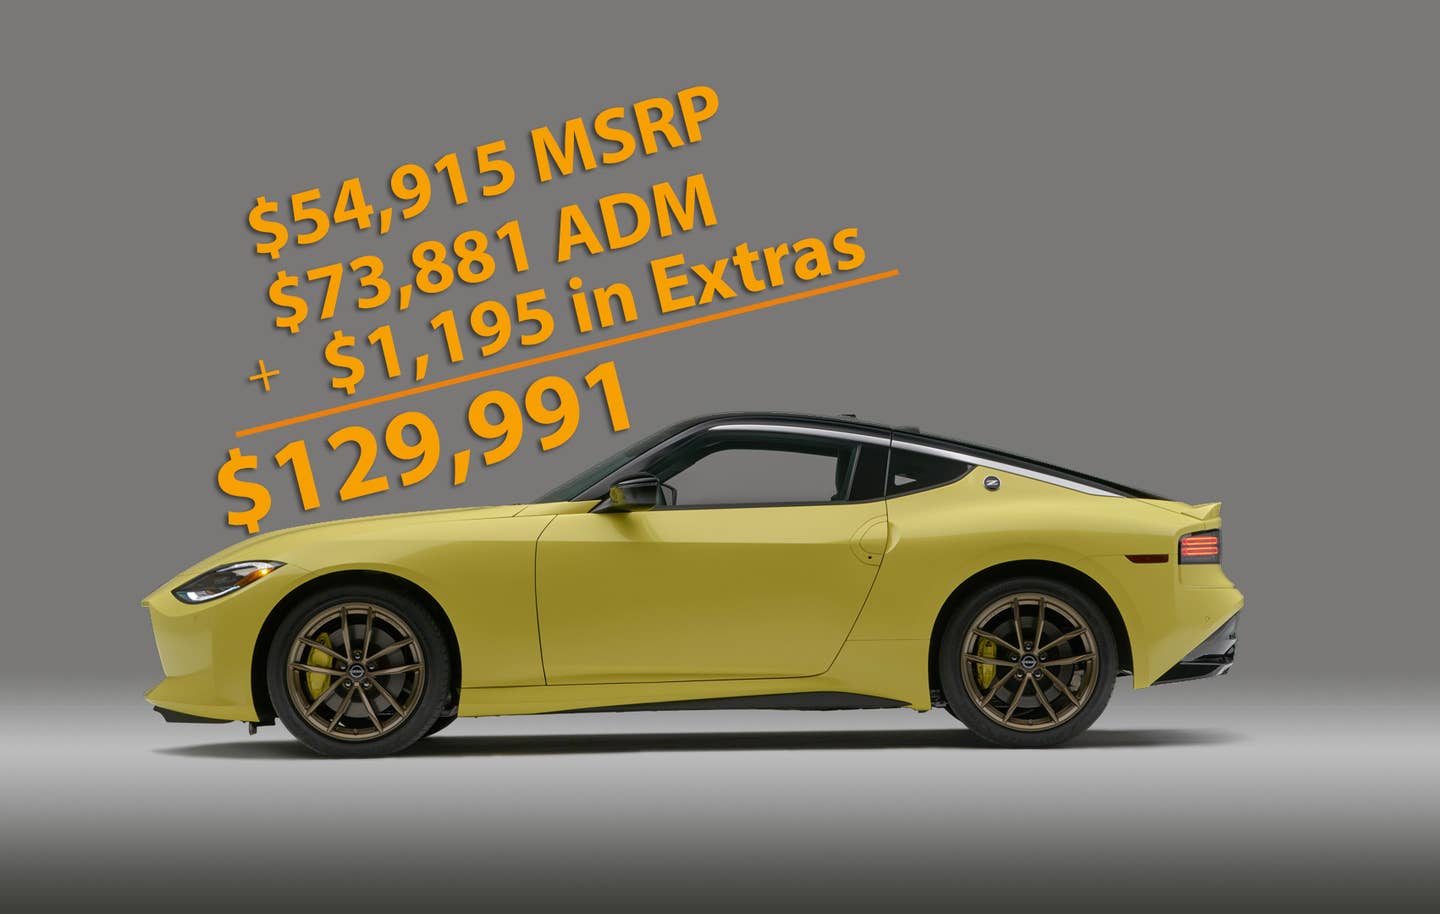 There’s a New Nissan Z With a $74K Markup—But the Dealer Isn’t Selling It Just Yet